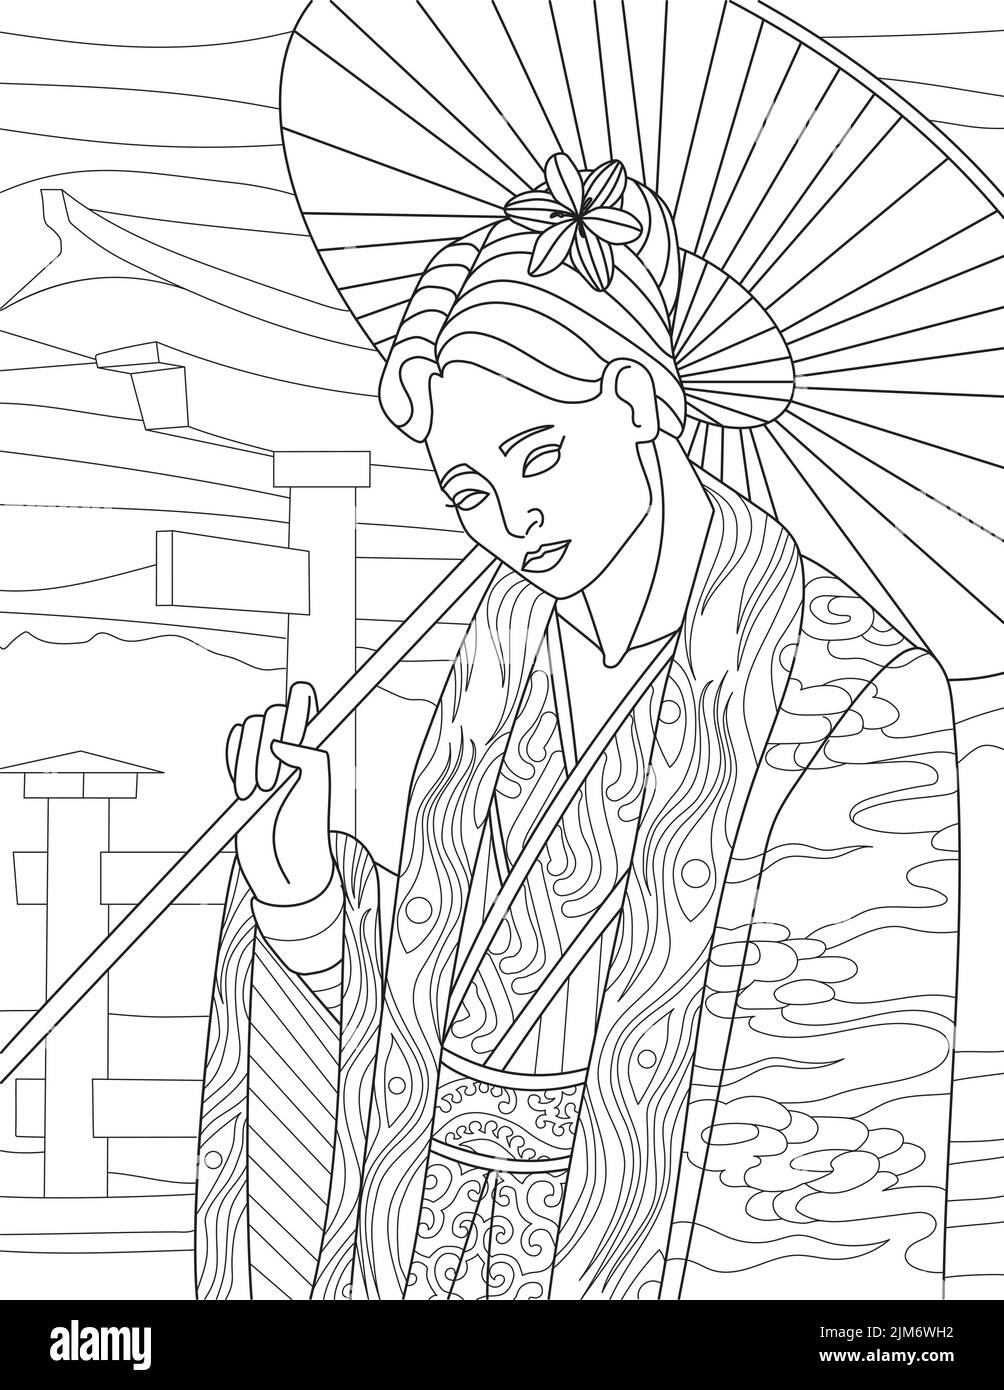 Coloring Page With Japanese Woman Dressed In Traditional Clothes Holding Umbrella. Sheet To Be Colored With Girl From Japan With Conventional Dressing Stock Vector